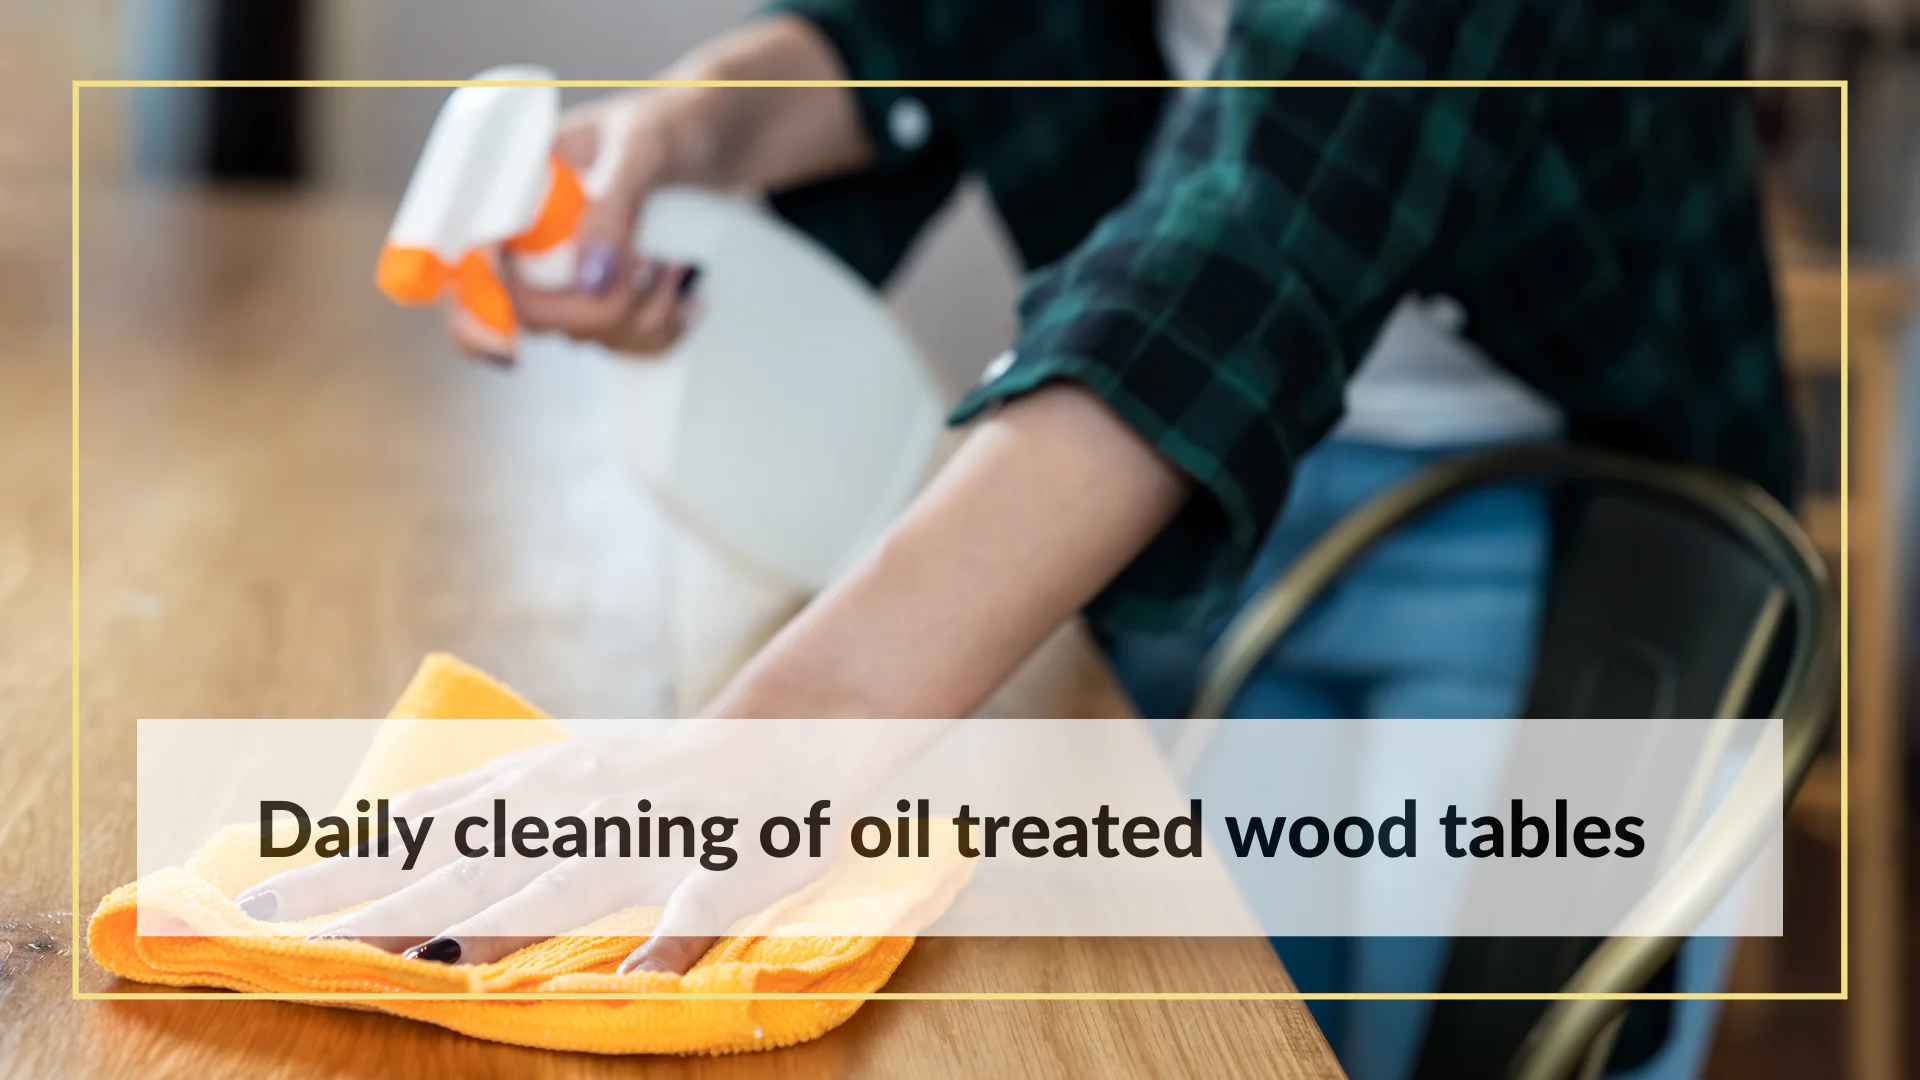 Daily cleaning of oil-treated wood tables – how to clean wood tables?